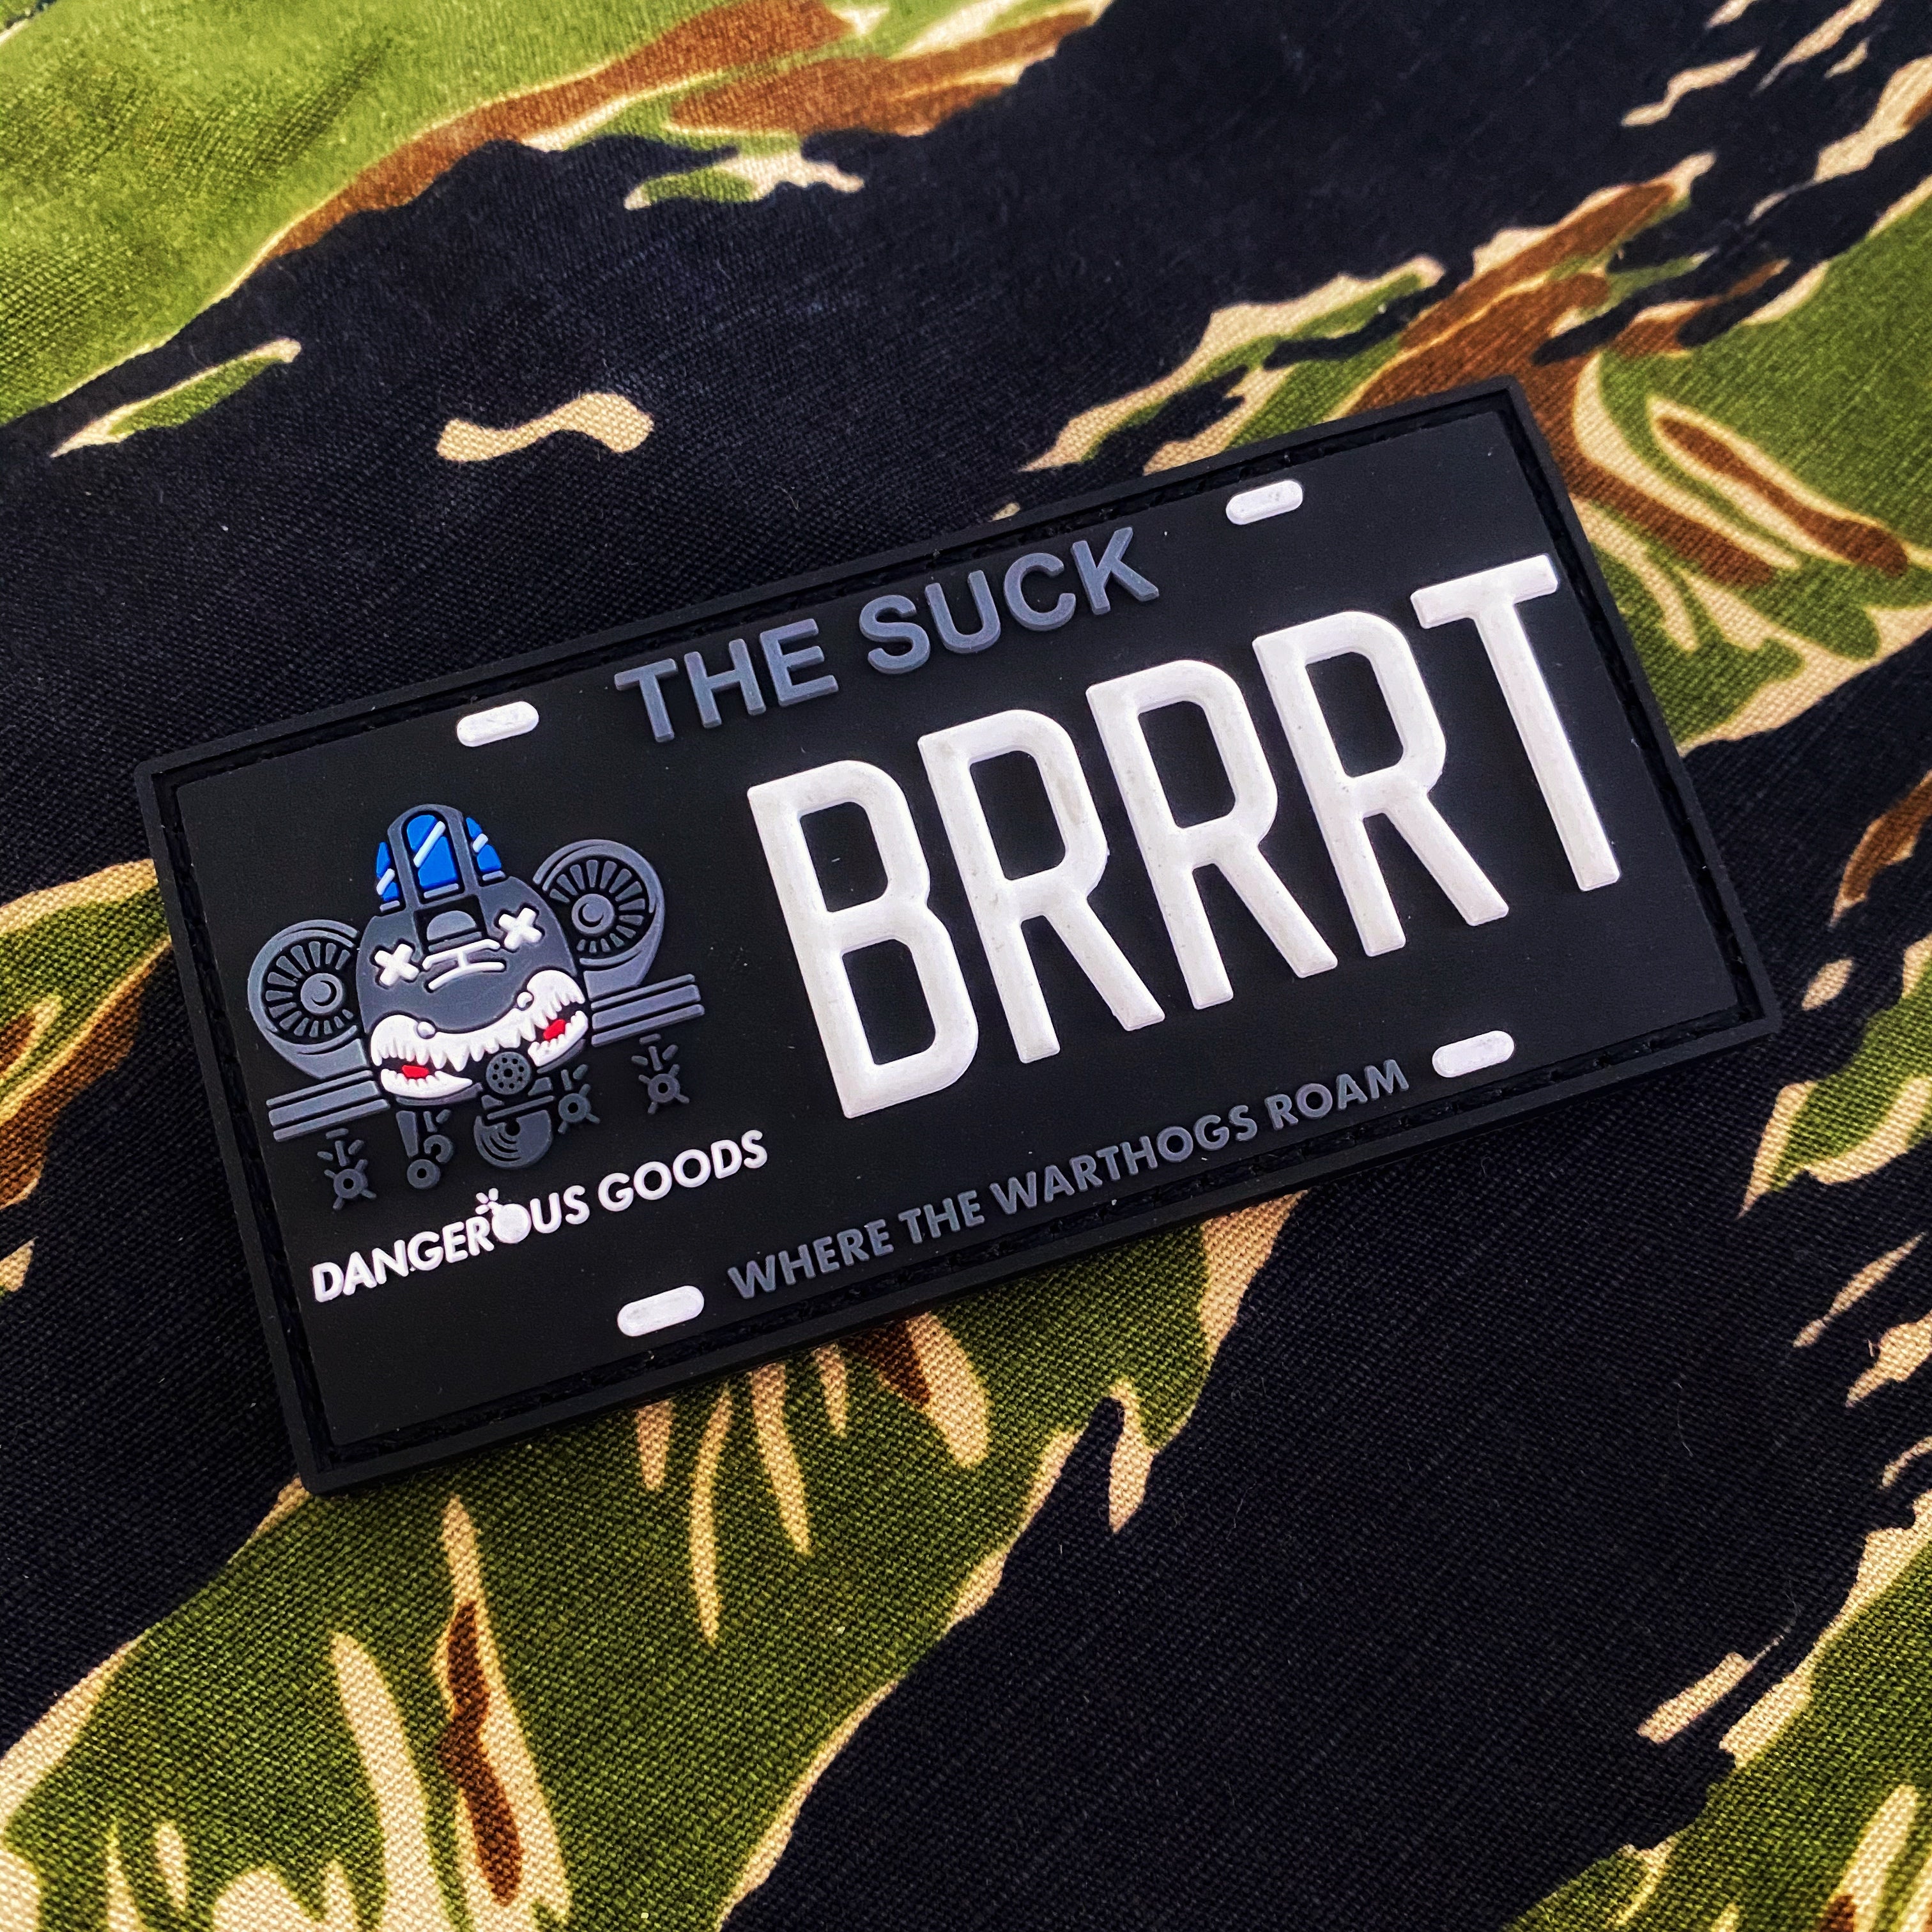 Dangerous Goods®️ THE SUCK A10 Warthog BRRRT License Plate Morale Patch